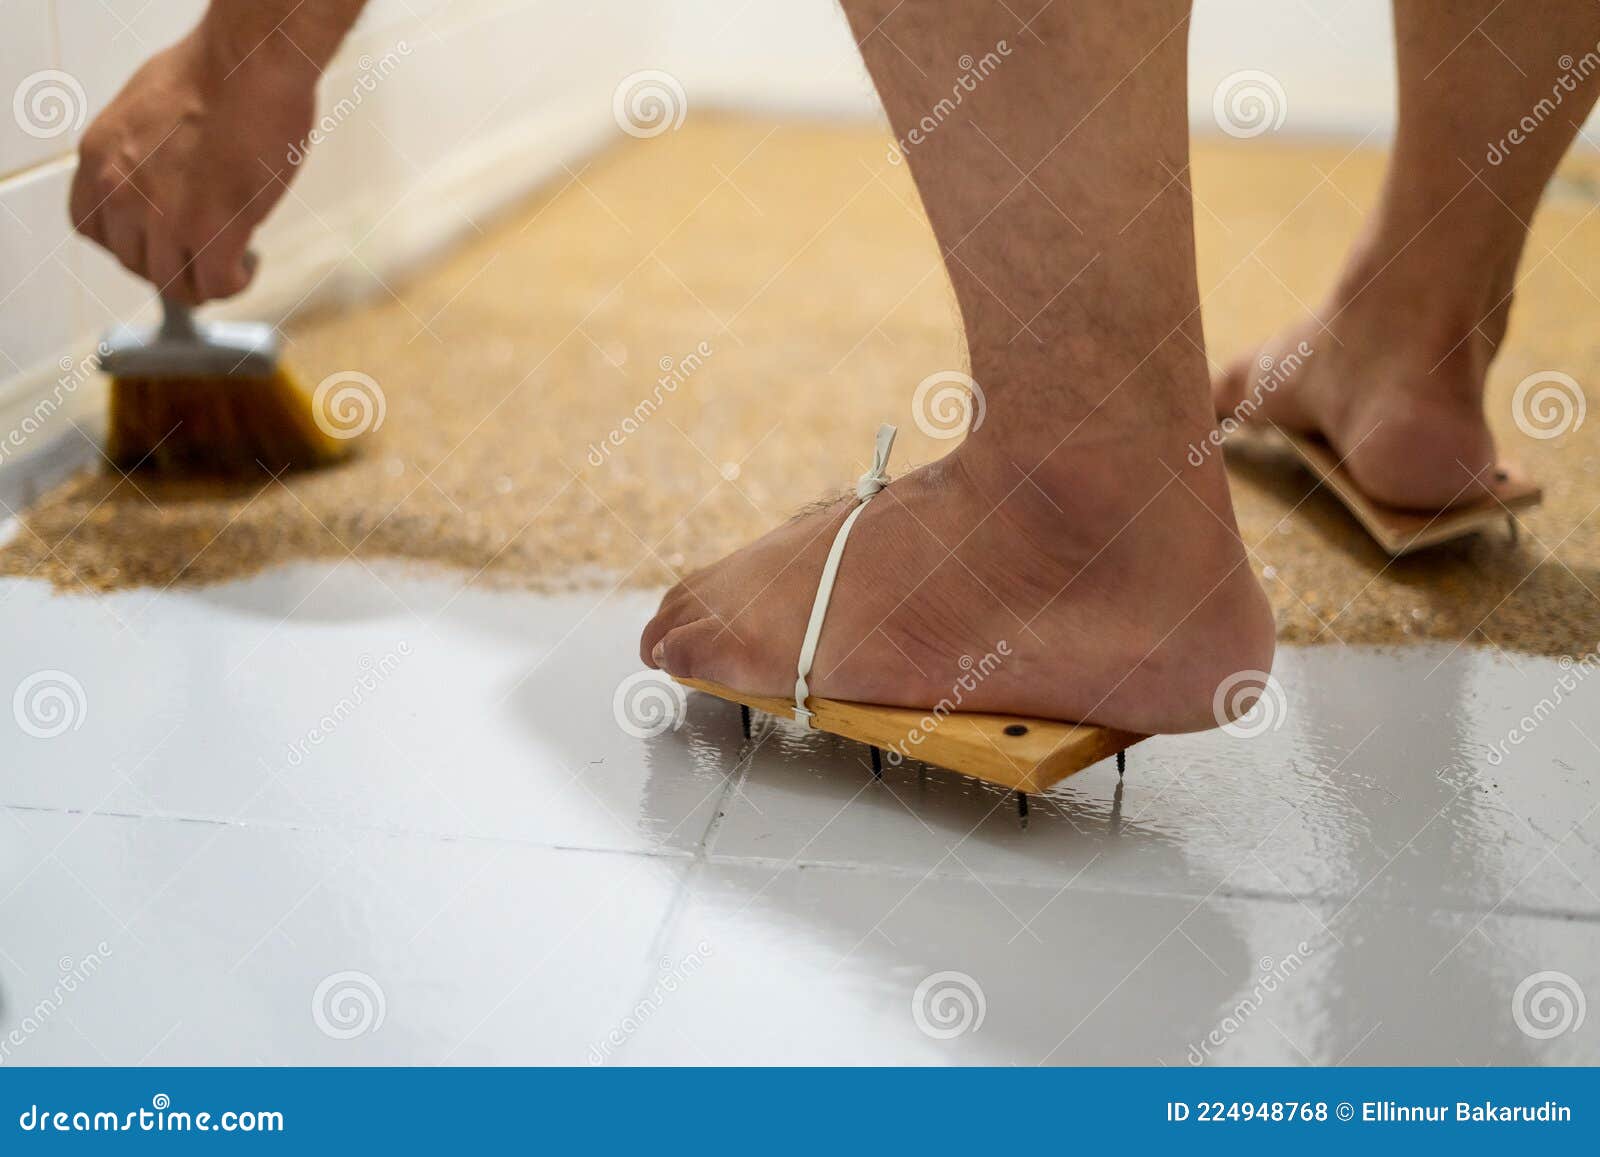 Feet Wearing Painters' Wooden Shoes Nails Self Leveling Epoxy